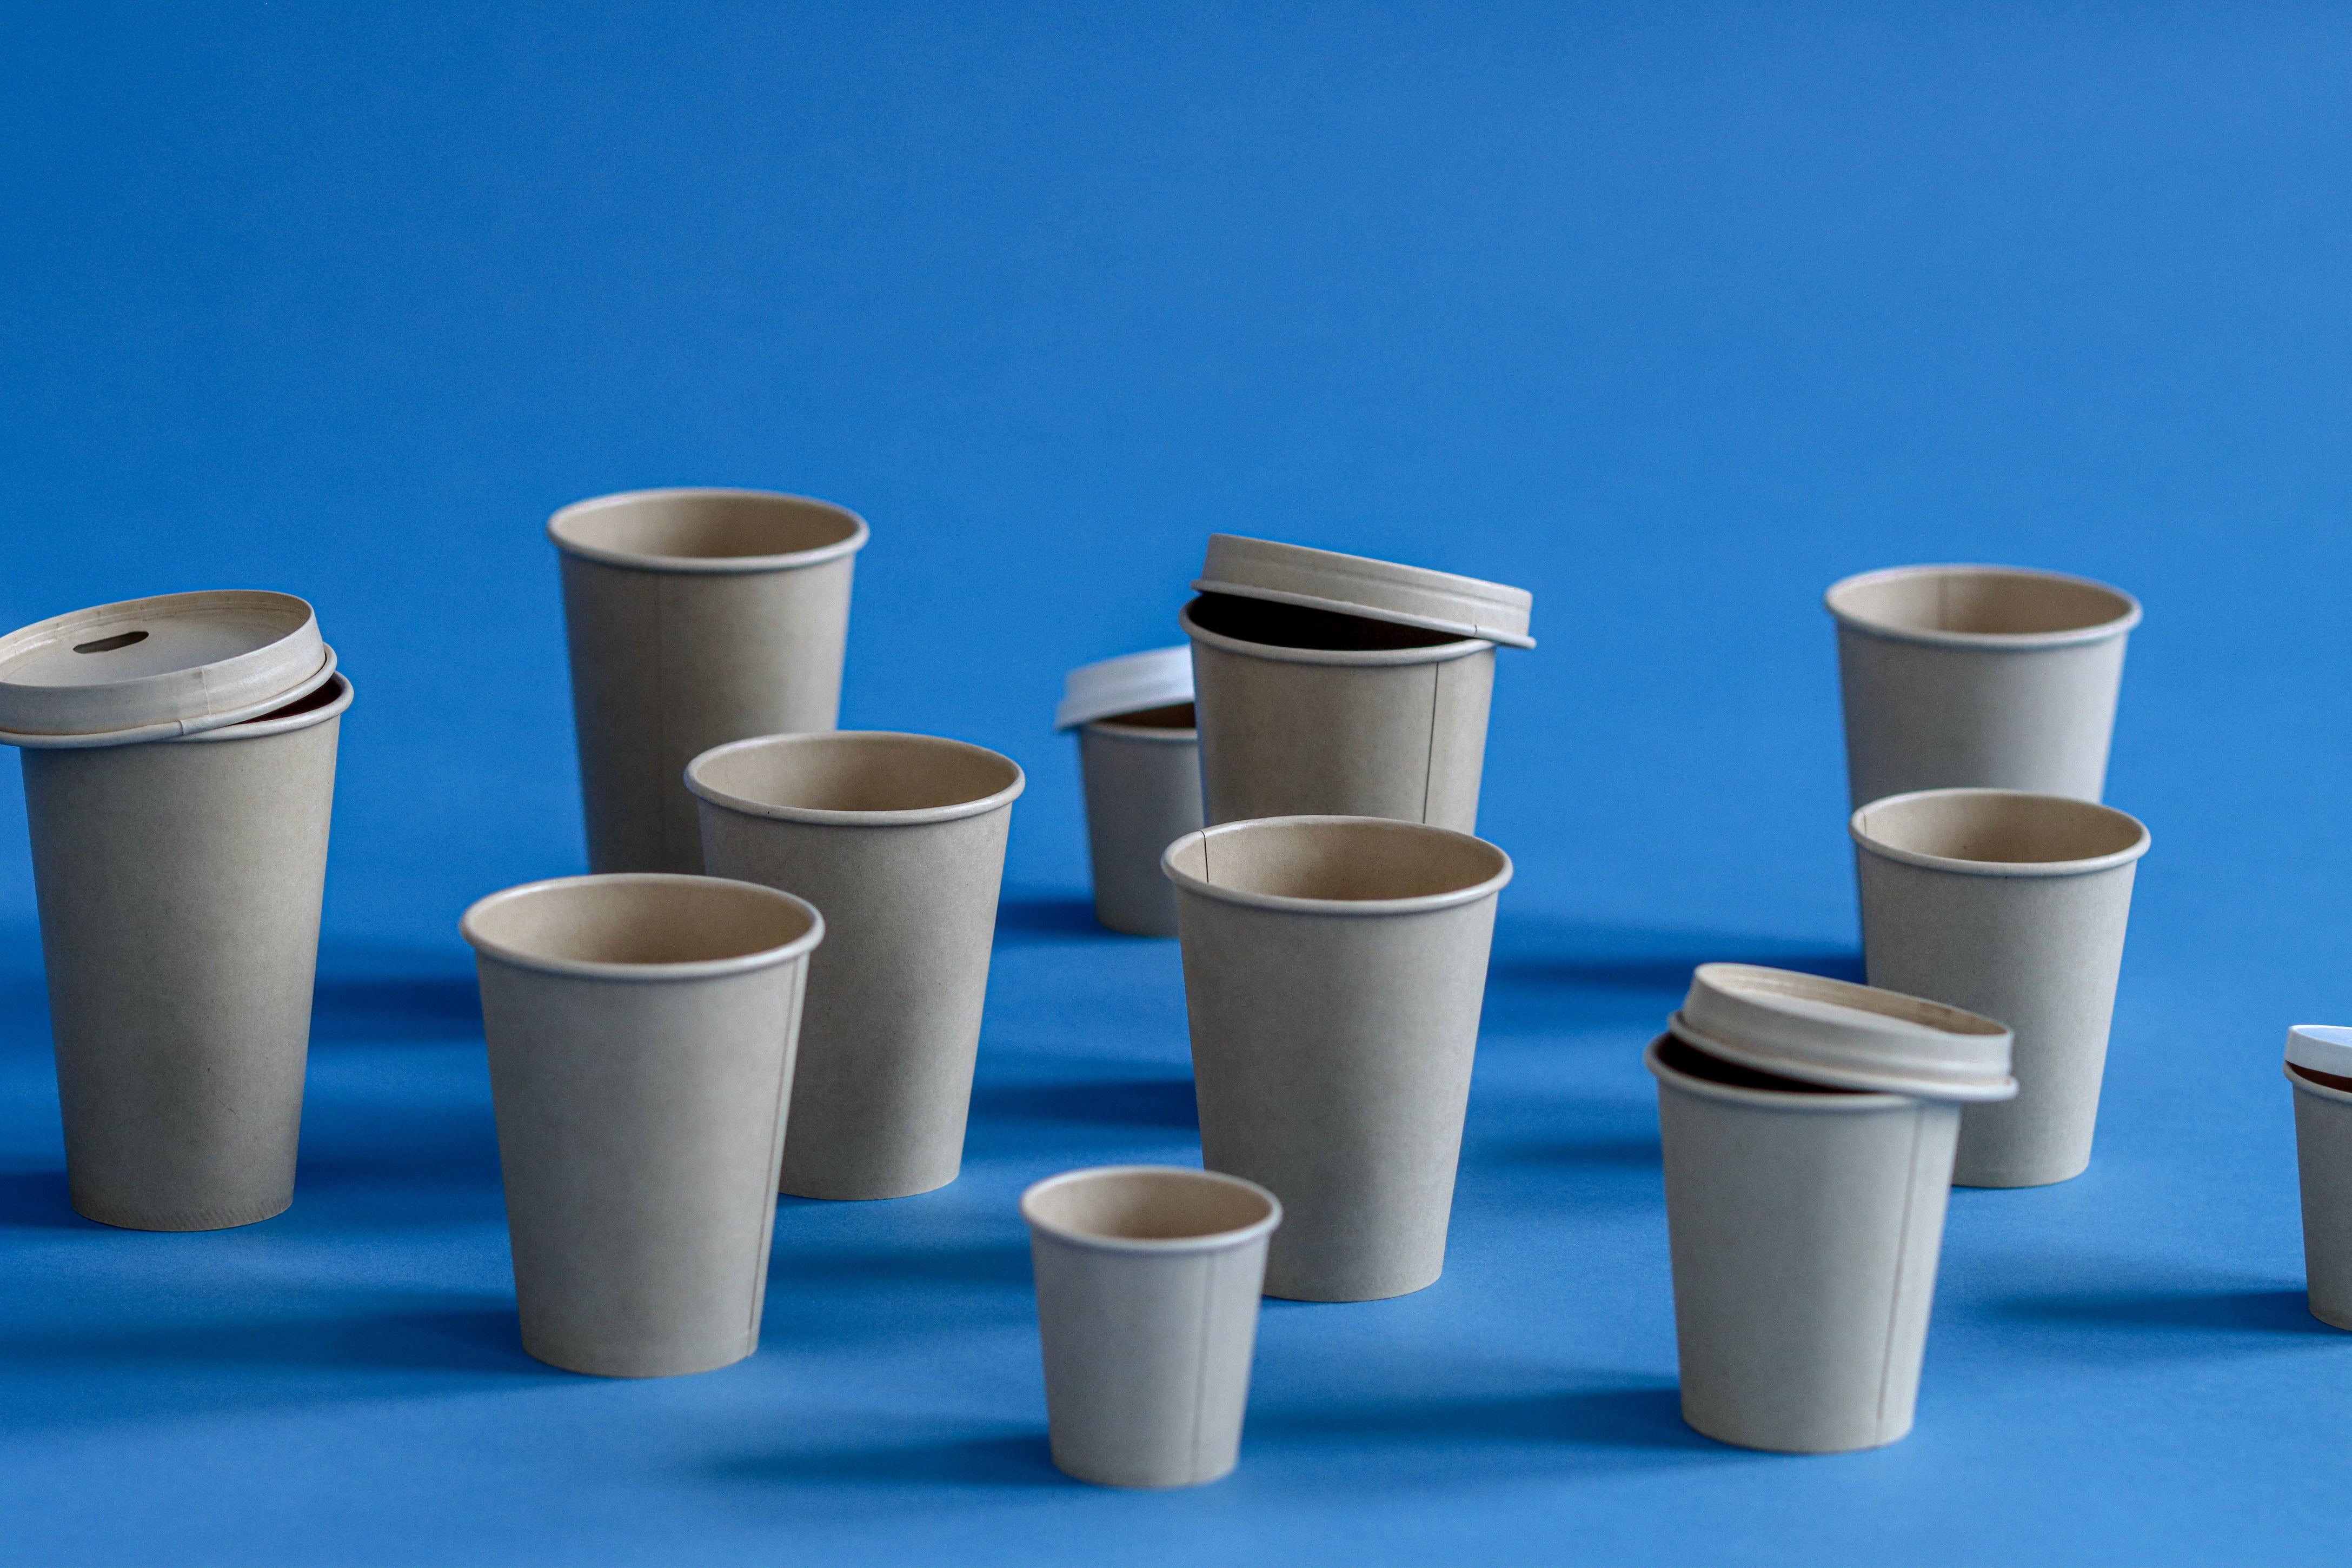 The image shows several bamboo disposable cups, arranged on a blue background, suggesting a theme of sustainable packaging solutions.